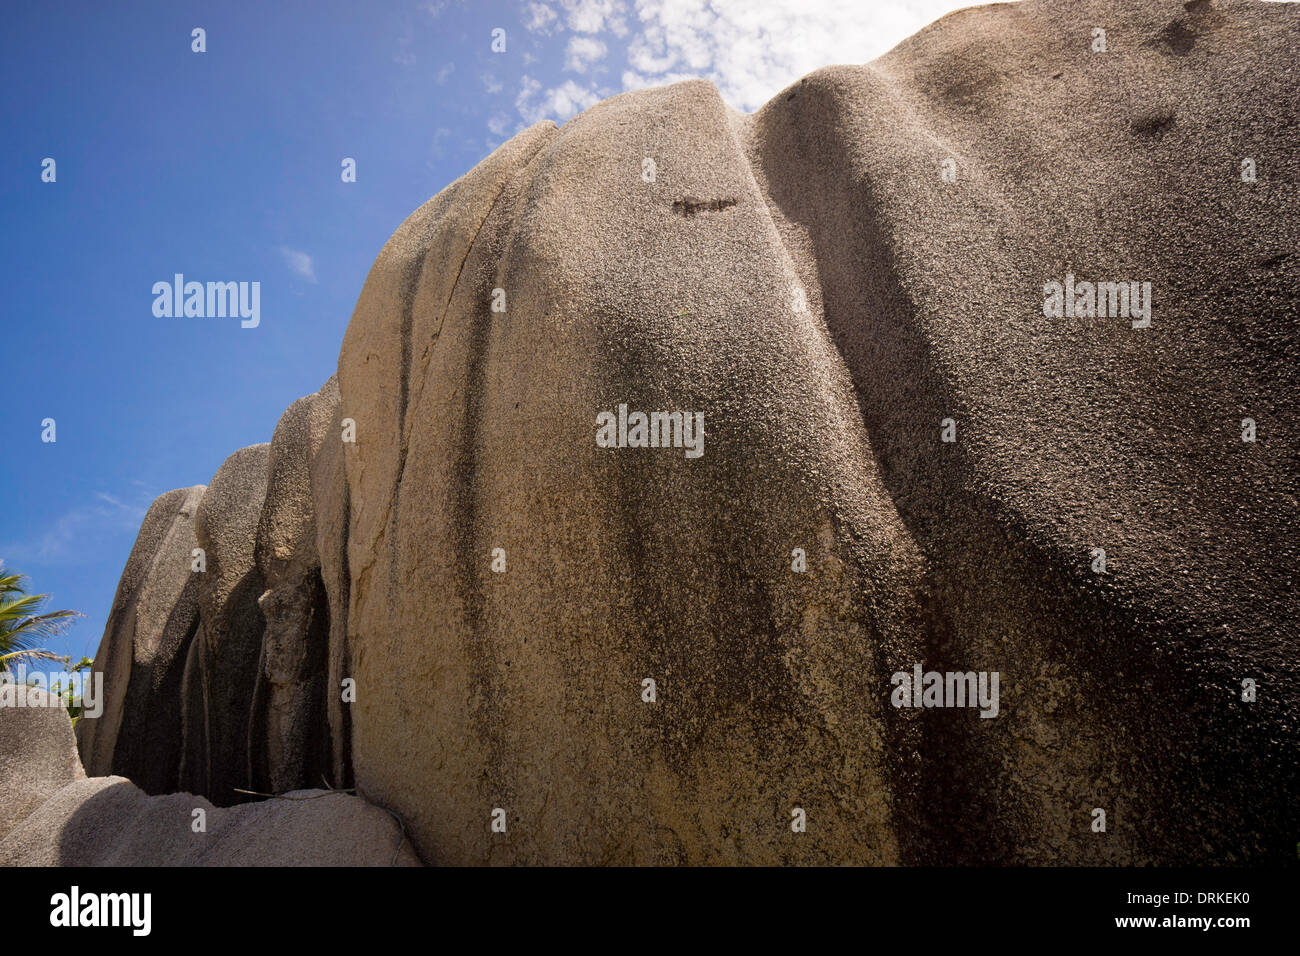 For the Seychelles typical rock formations on a sandy beach, Anse Union, La Digue, Seychelles, Indian Ocean, Africa - 2013 Stock Photo